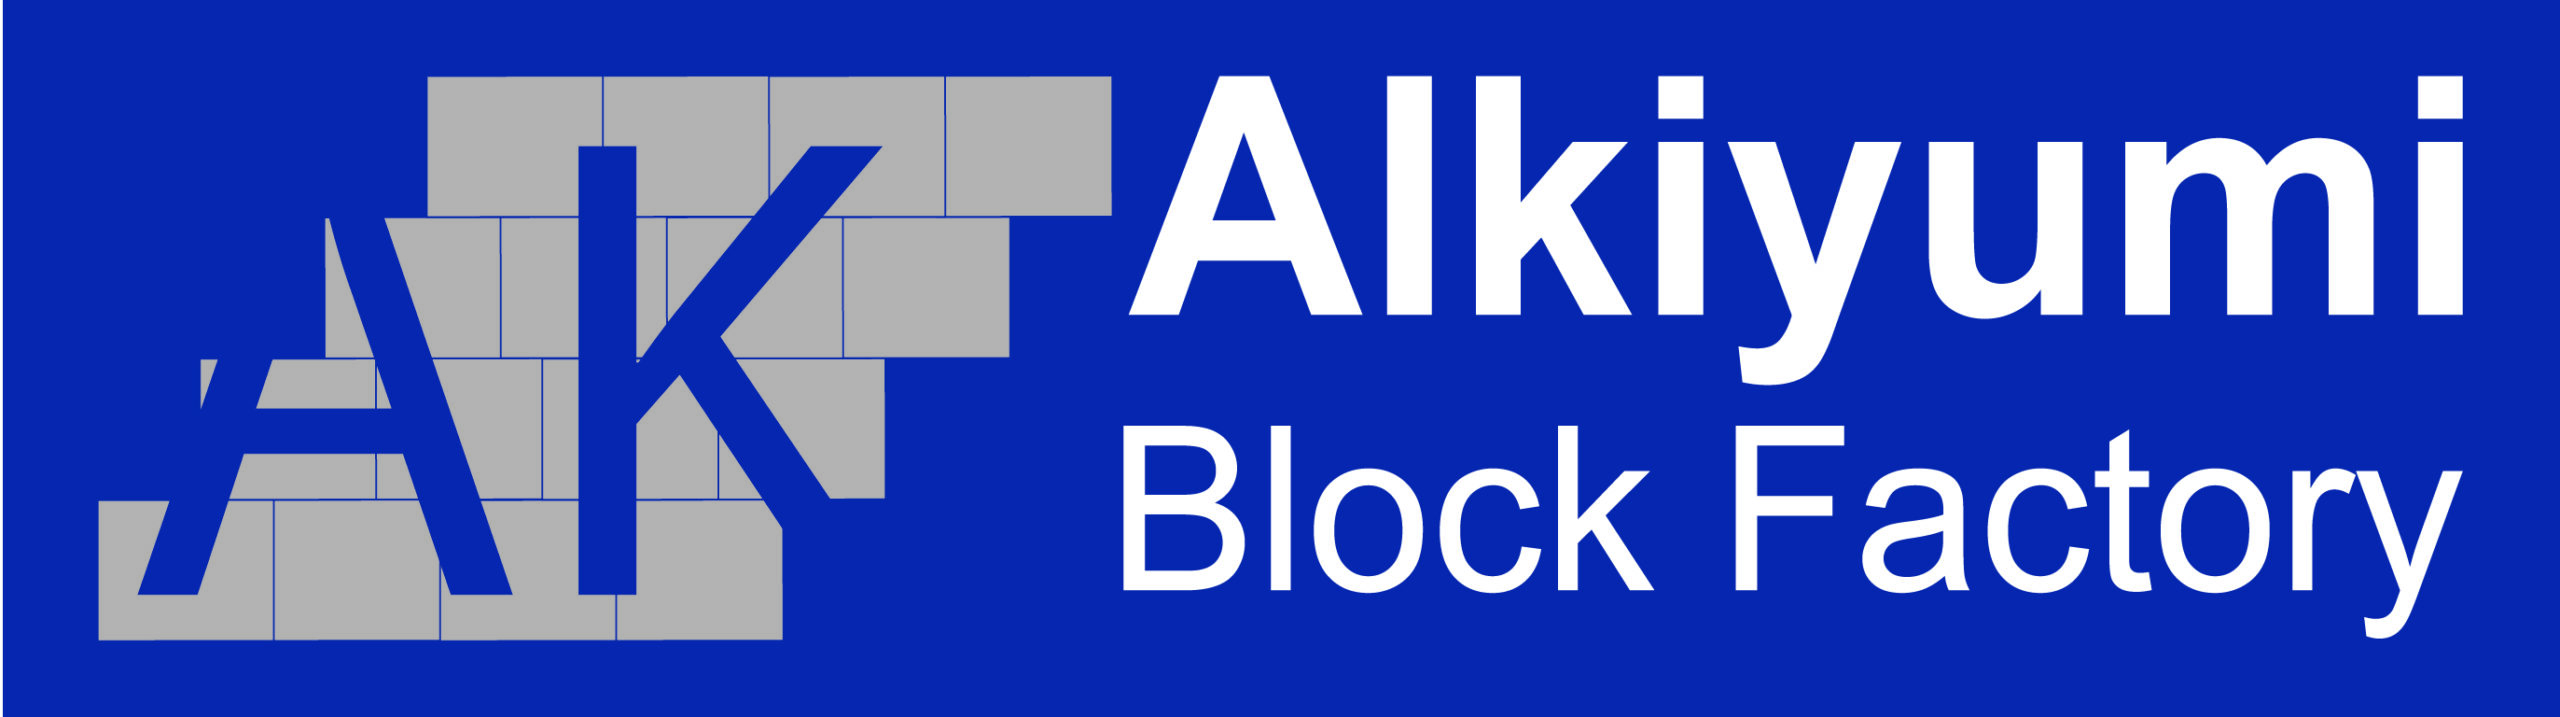 Al Kiyumi Block Factory, situated near the Majan Industrial Area in Oman, is a manufacturer of concrete building blocks. Their offerings likely include a variety of concrete block types for construction purposes. Daleel 1010 lists them as a supplier of concrete blocks, precast concrete products, and potentially ready-mix concrete.